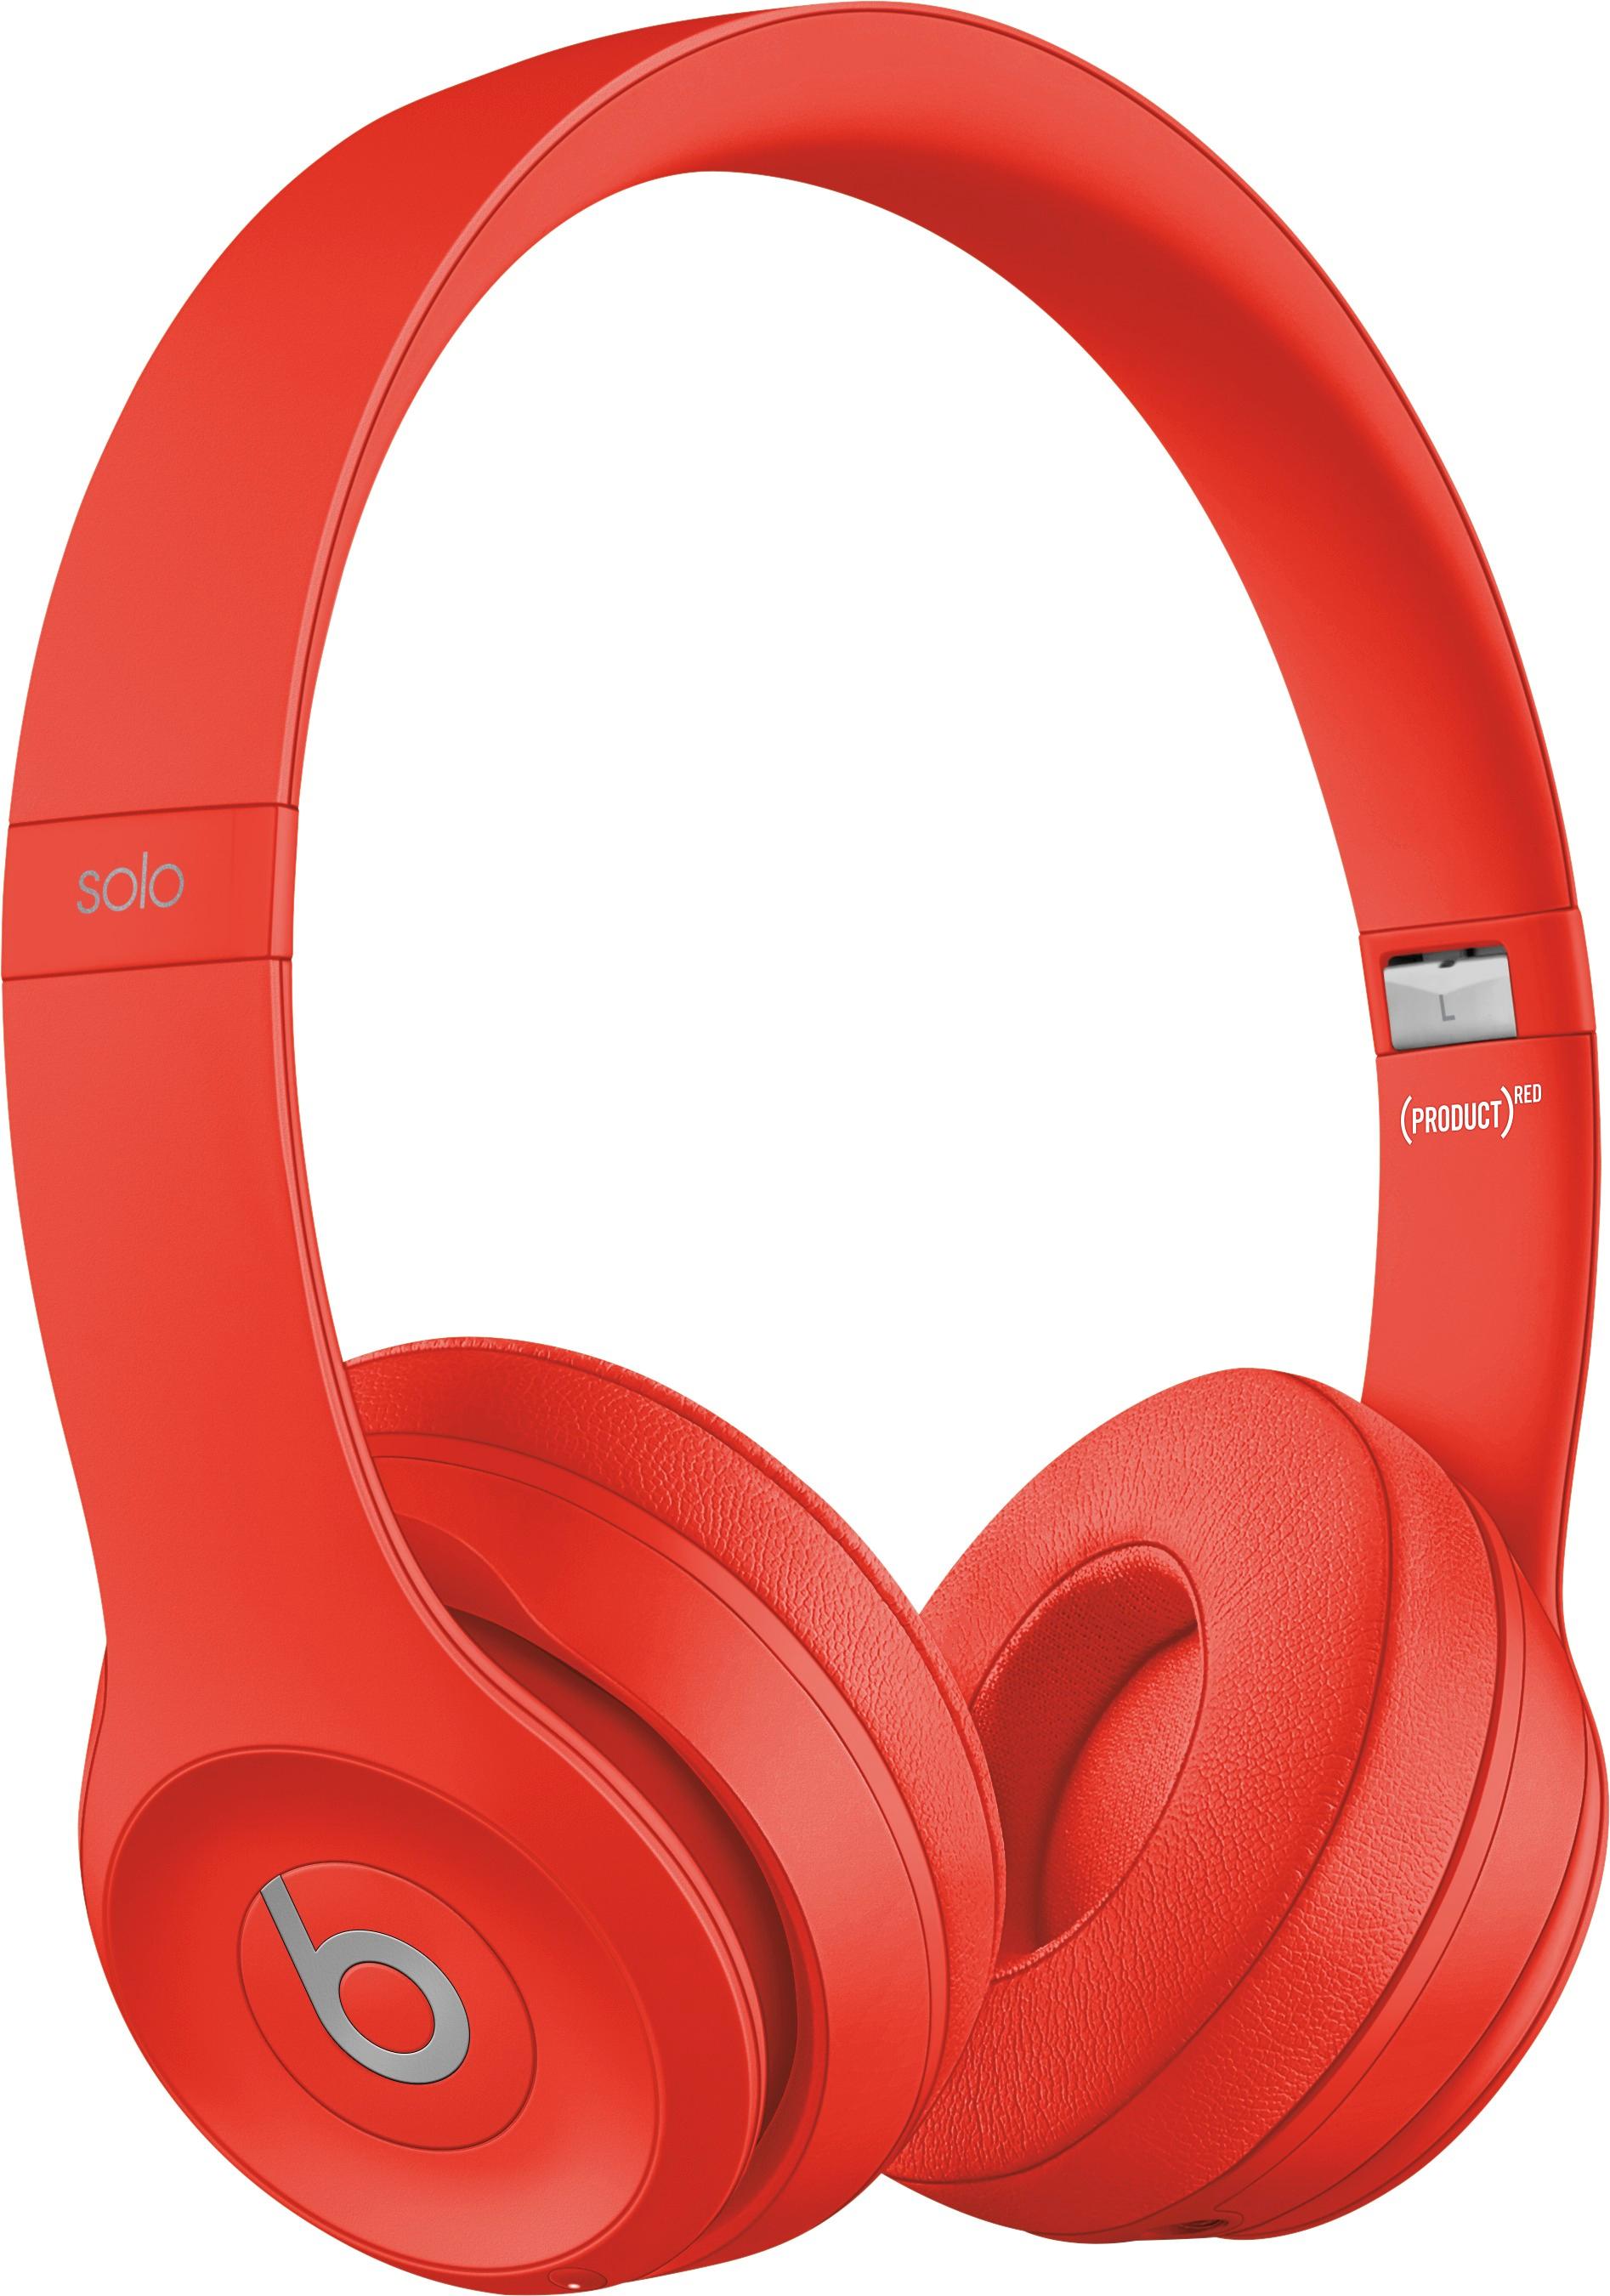 Beats by Dr. Dre Solo3 Wireless Headphones MP162LL/A (PRODUCT)RED - US